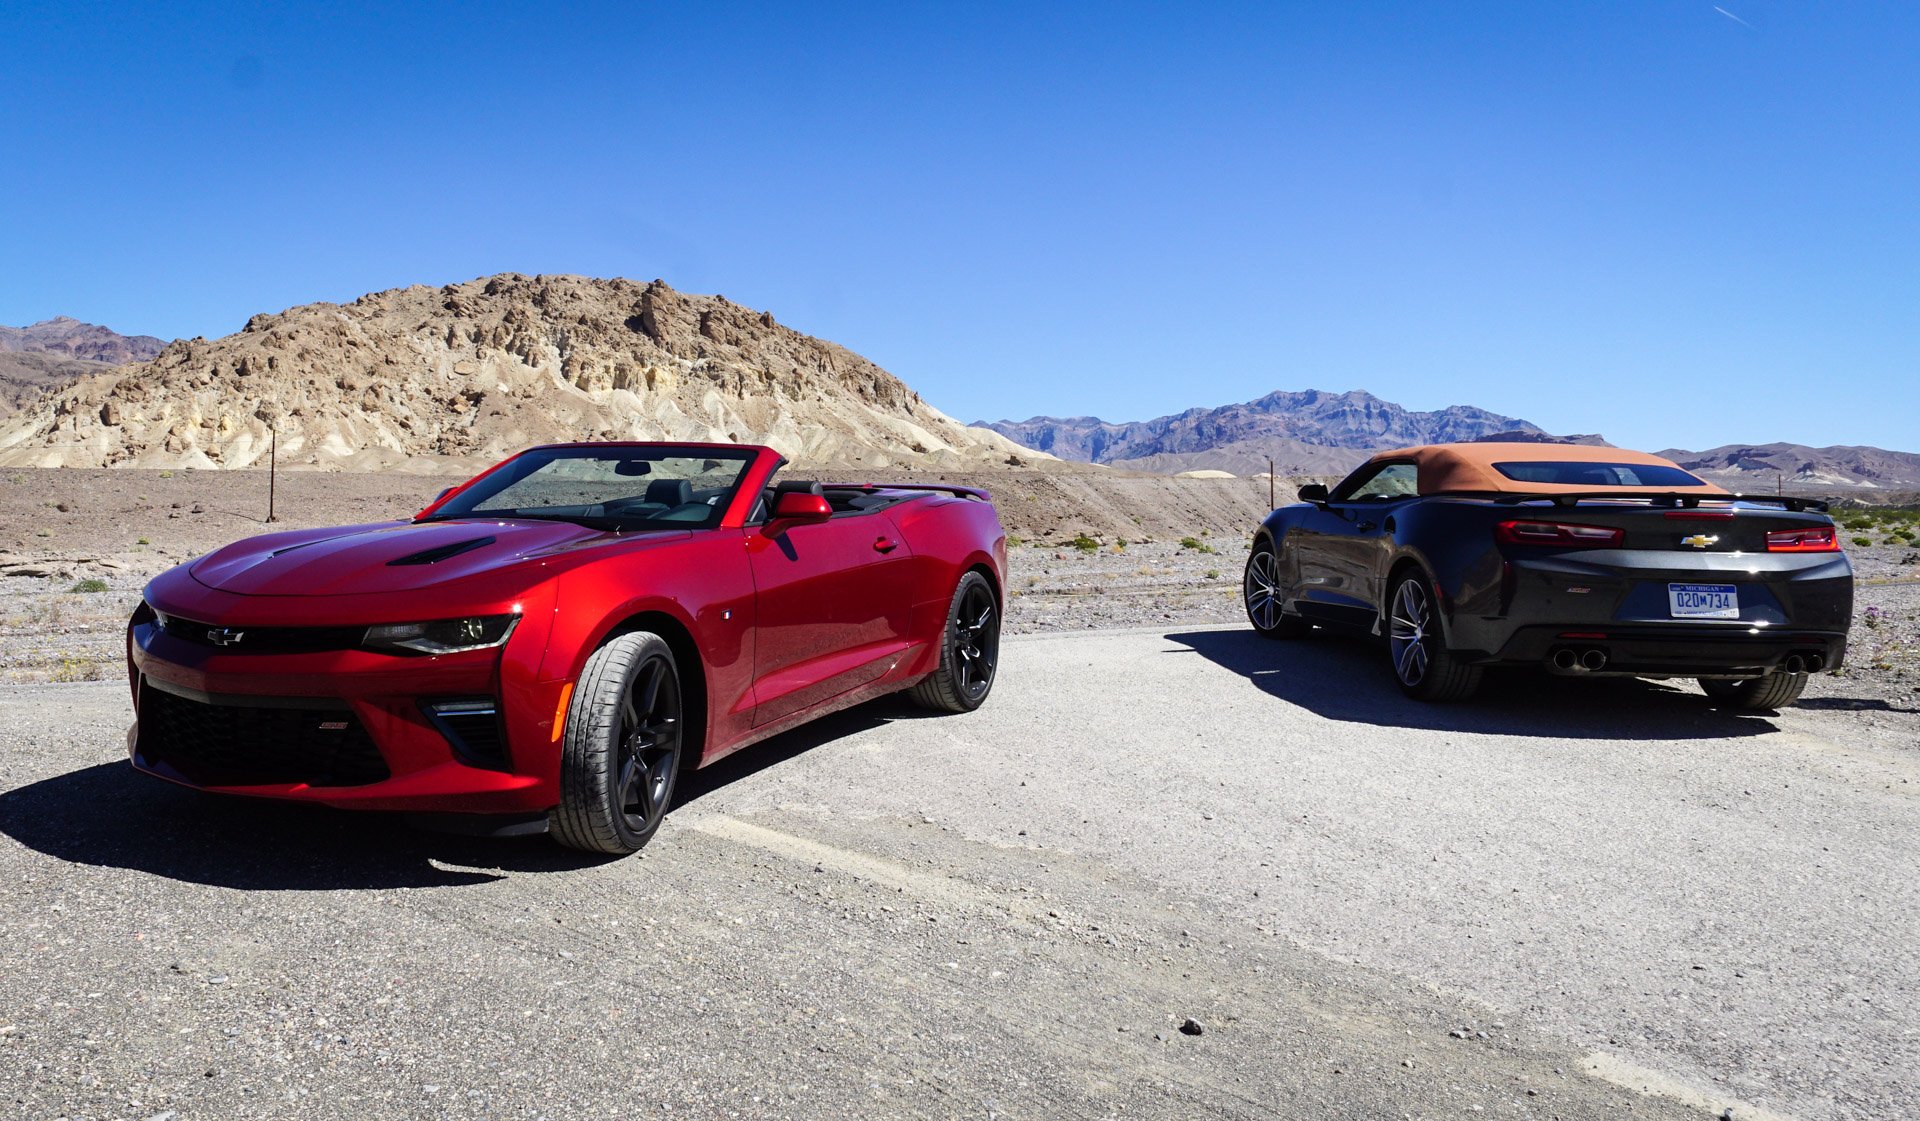 First Drive Review 2016 Chevrolet Camaro Ss Convertible 95 Octane